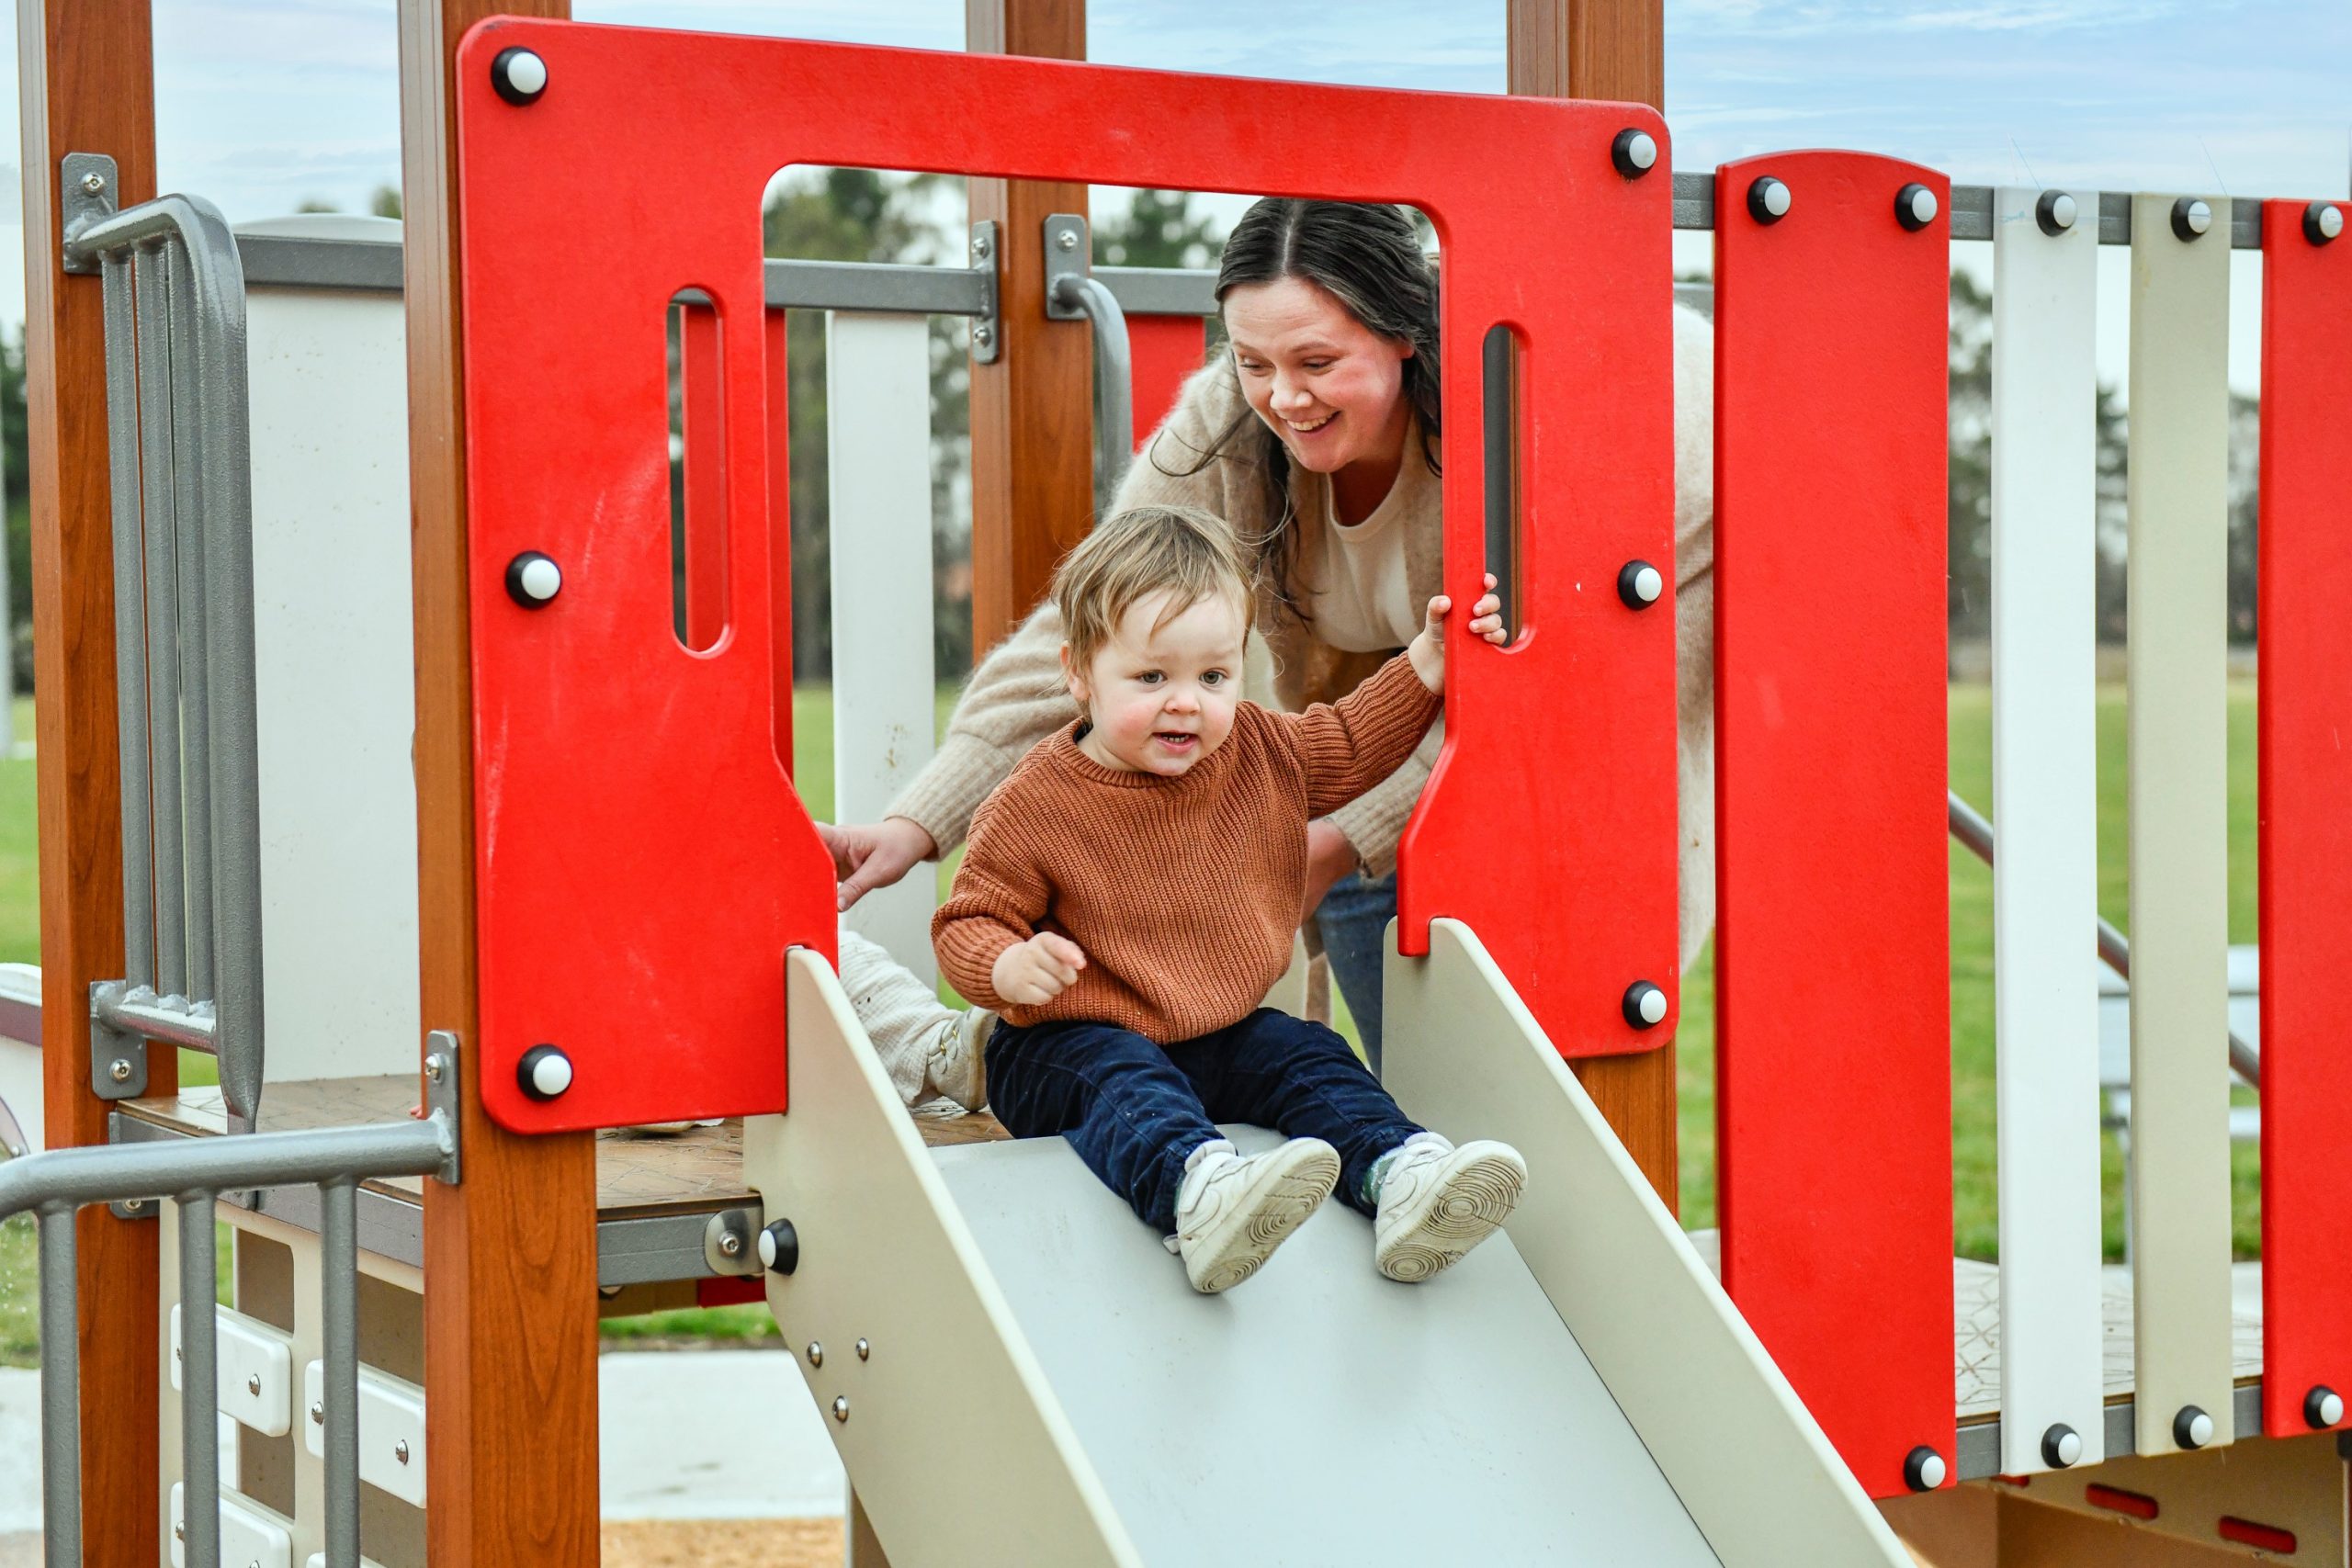 Lady playing with her toddler on the play equipment